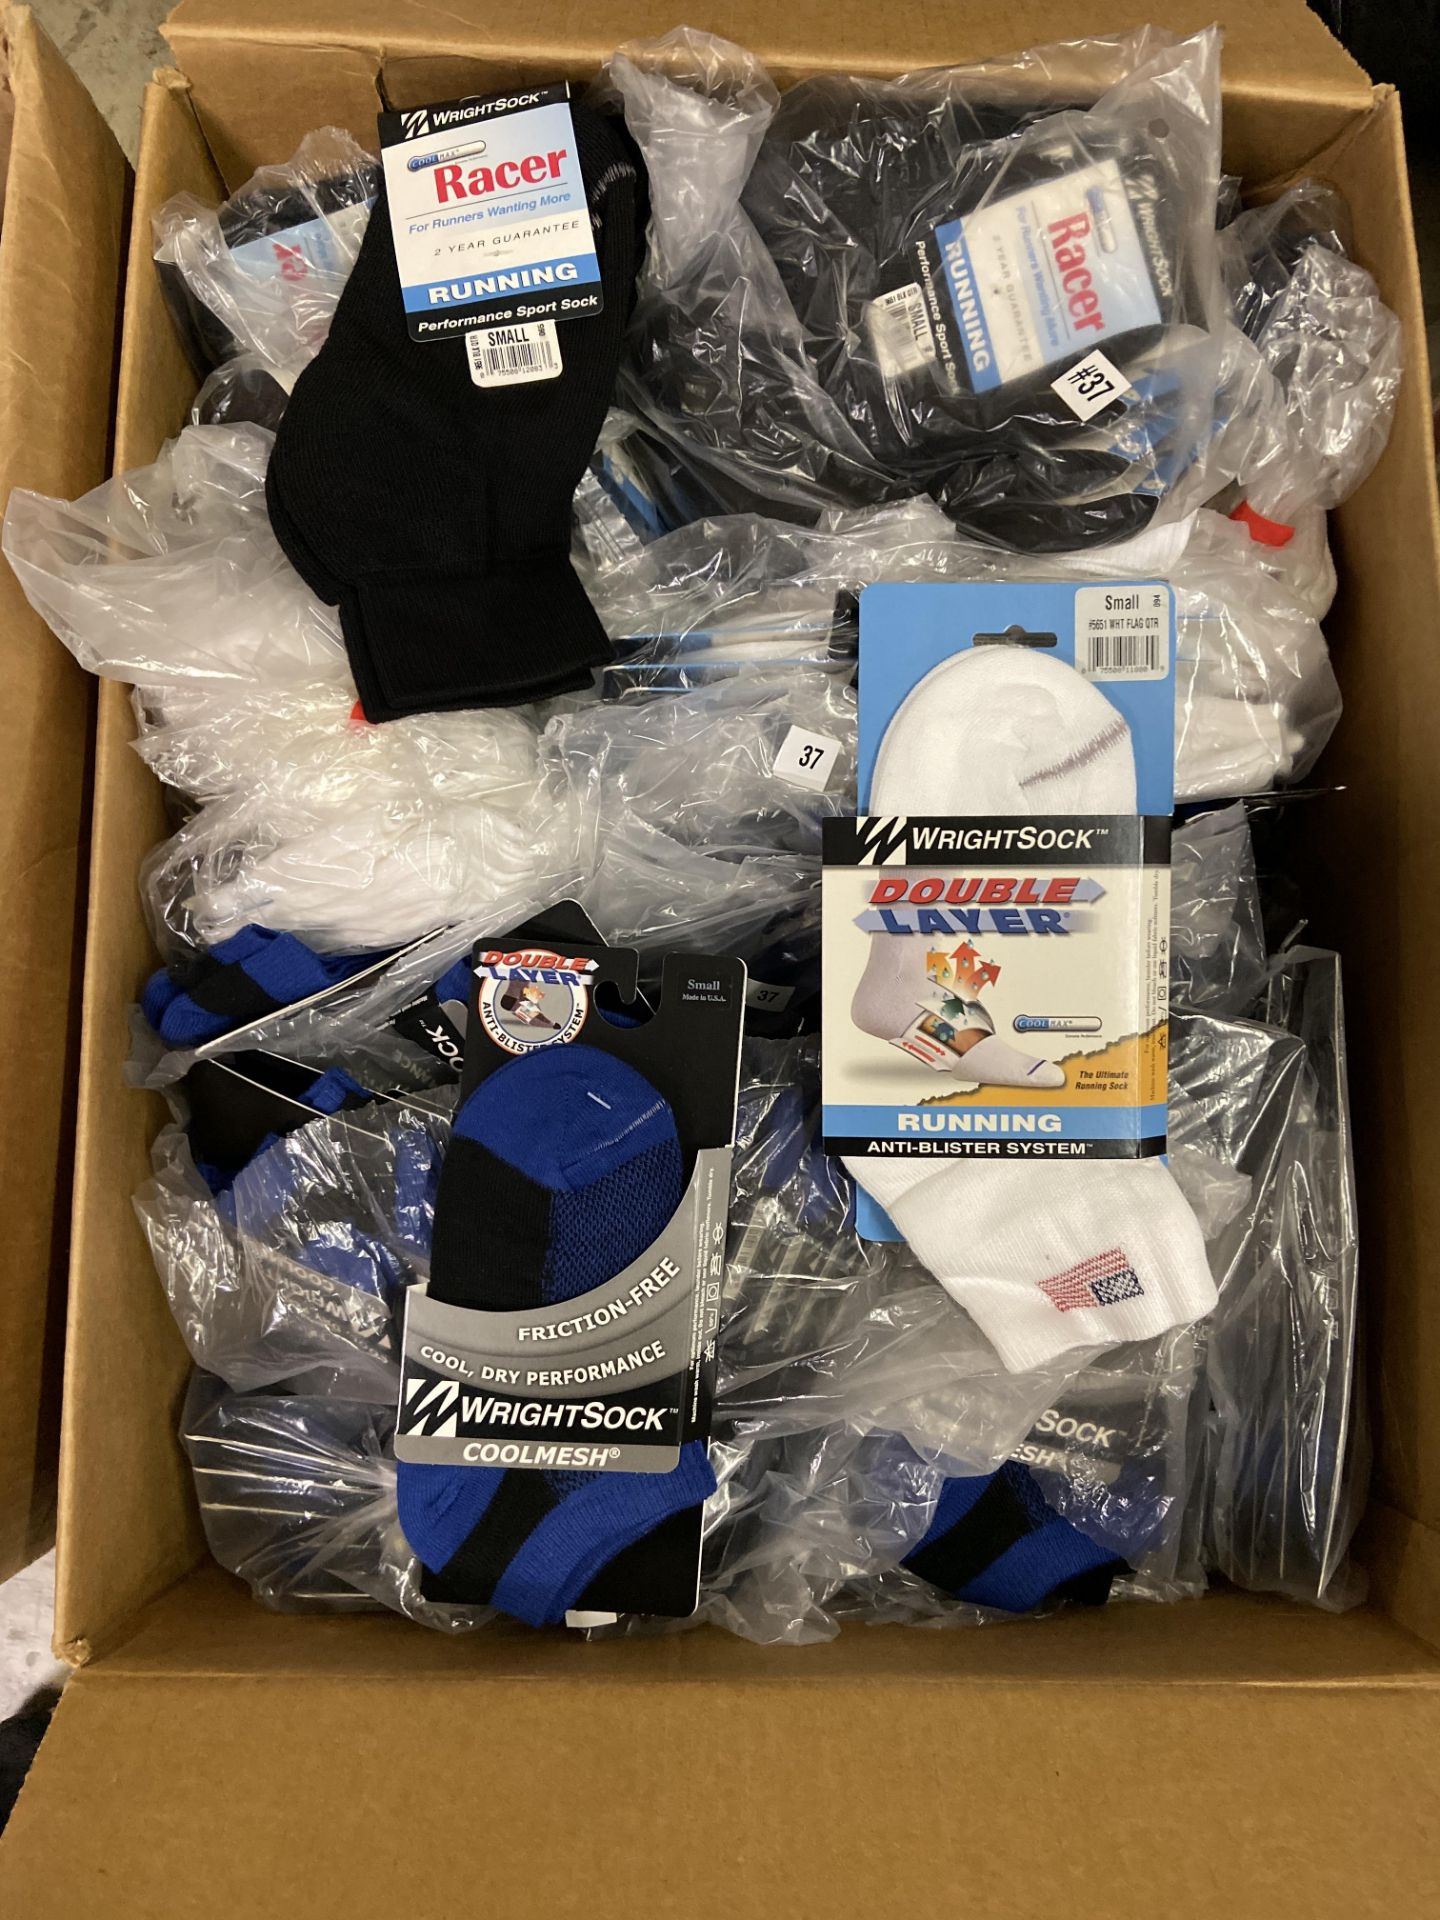 250+ packs of New Socks, Wrightsock Running and Coolmesh, Double Layer, Various Colors, USA Flag,